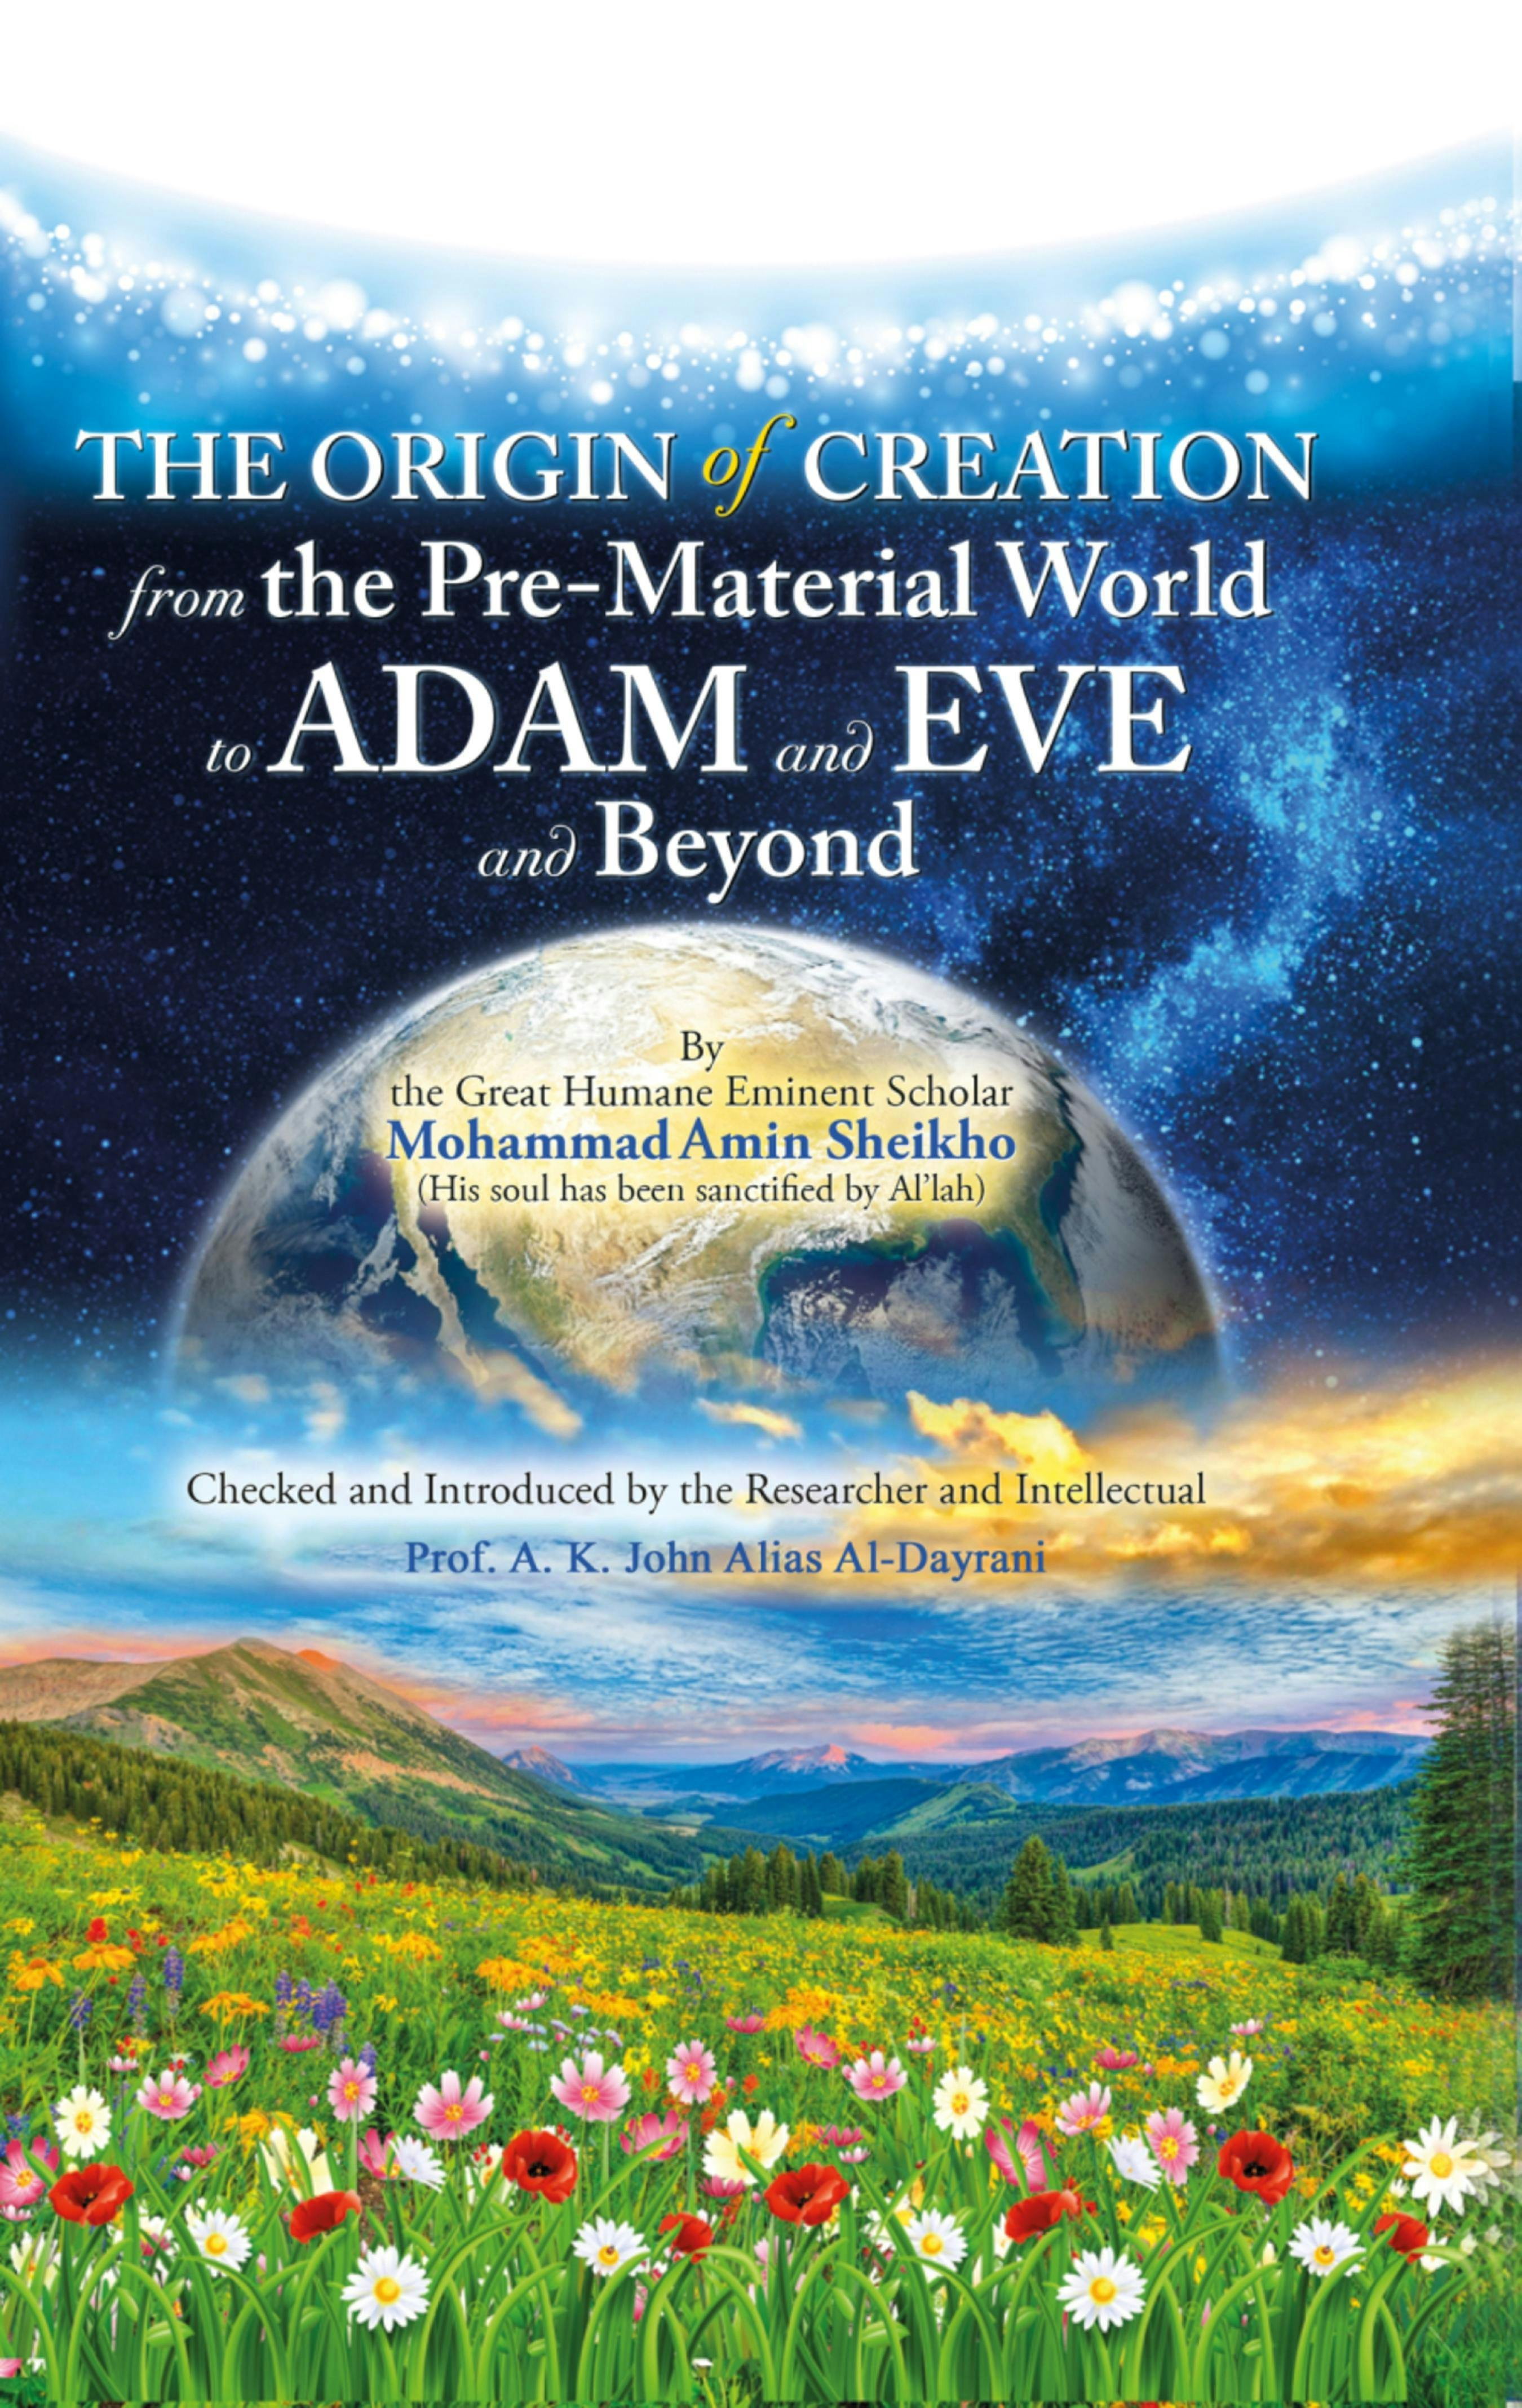 The Origin of Creation: From the Pre-Material World to Adam and Eve and Beyond - A. K. John Alias Al-Dayrani, Mohammad Amin Sheikho